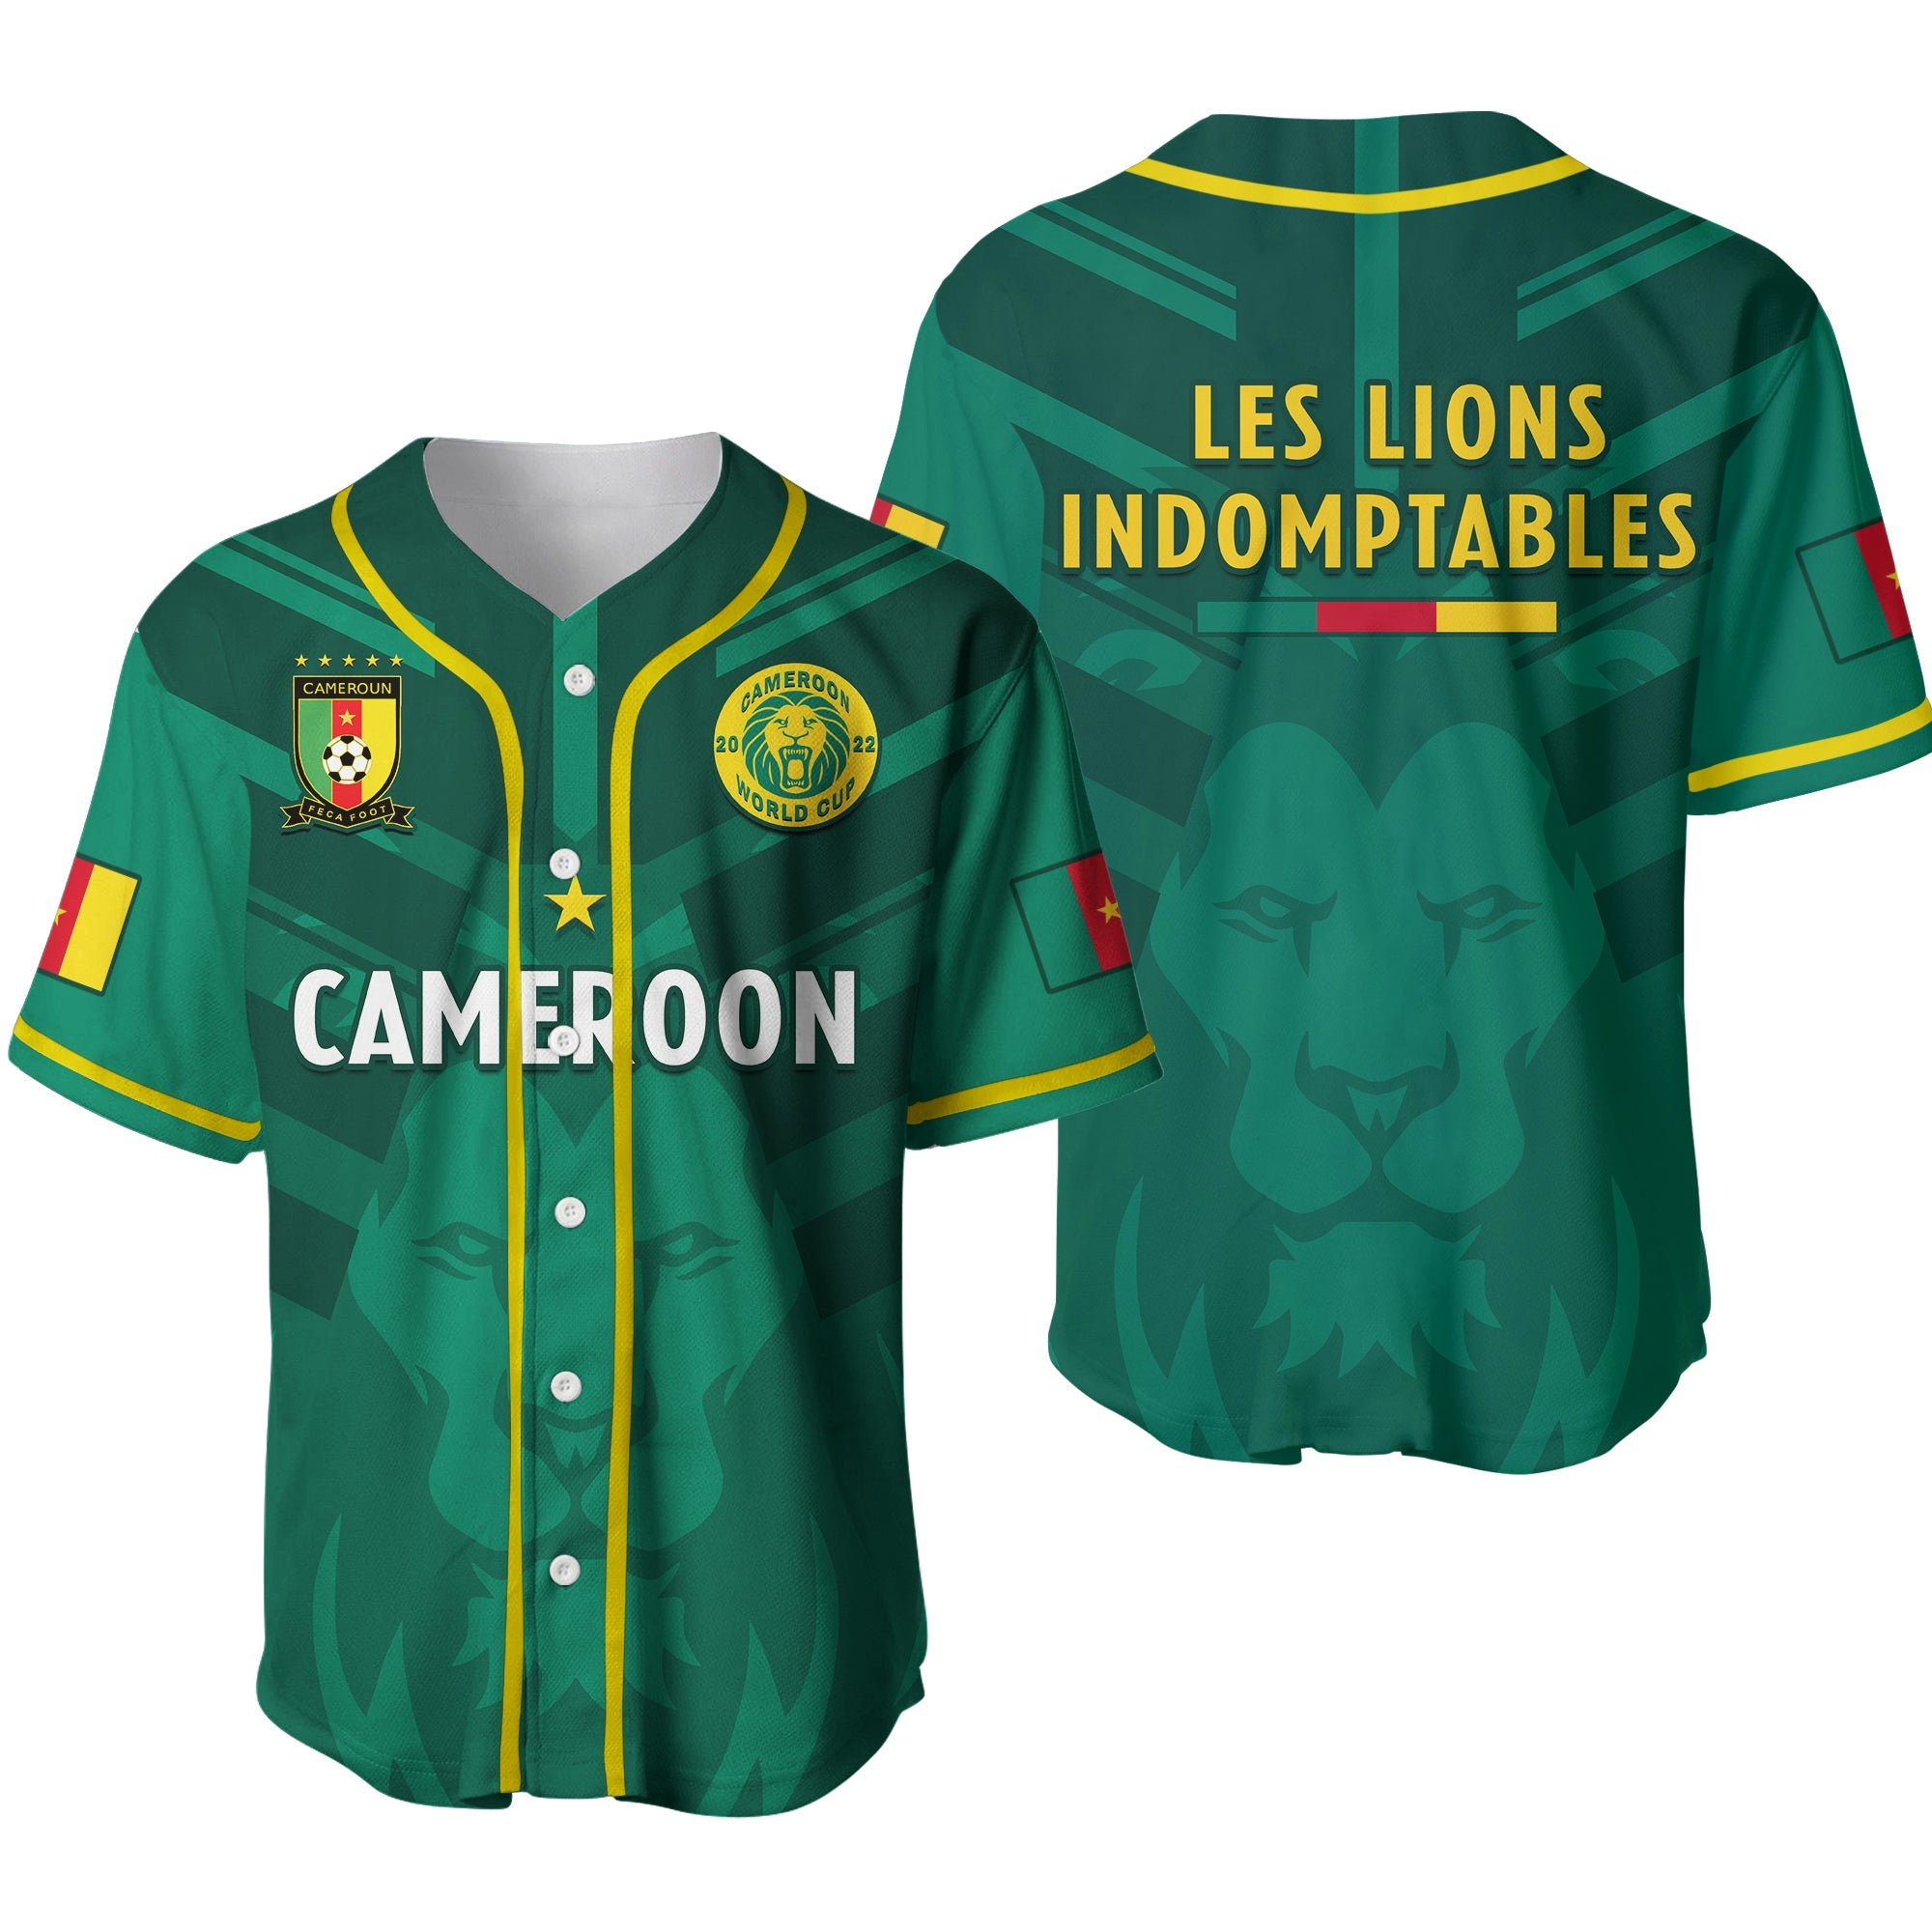 cameroon-football-baseball-jersey-les-lions-indomptables-green-world-cup-2022